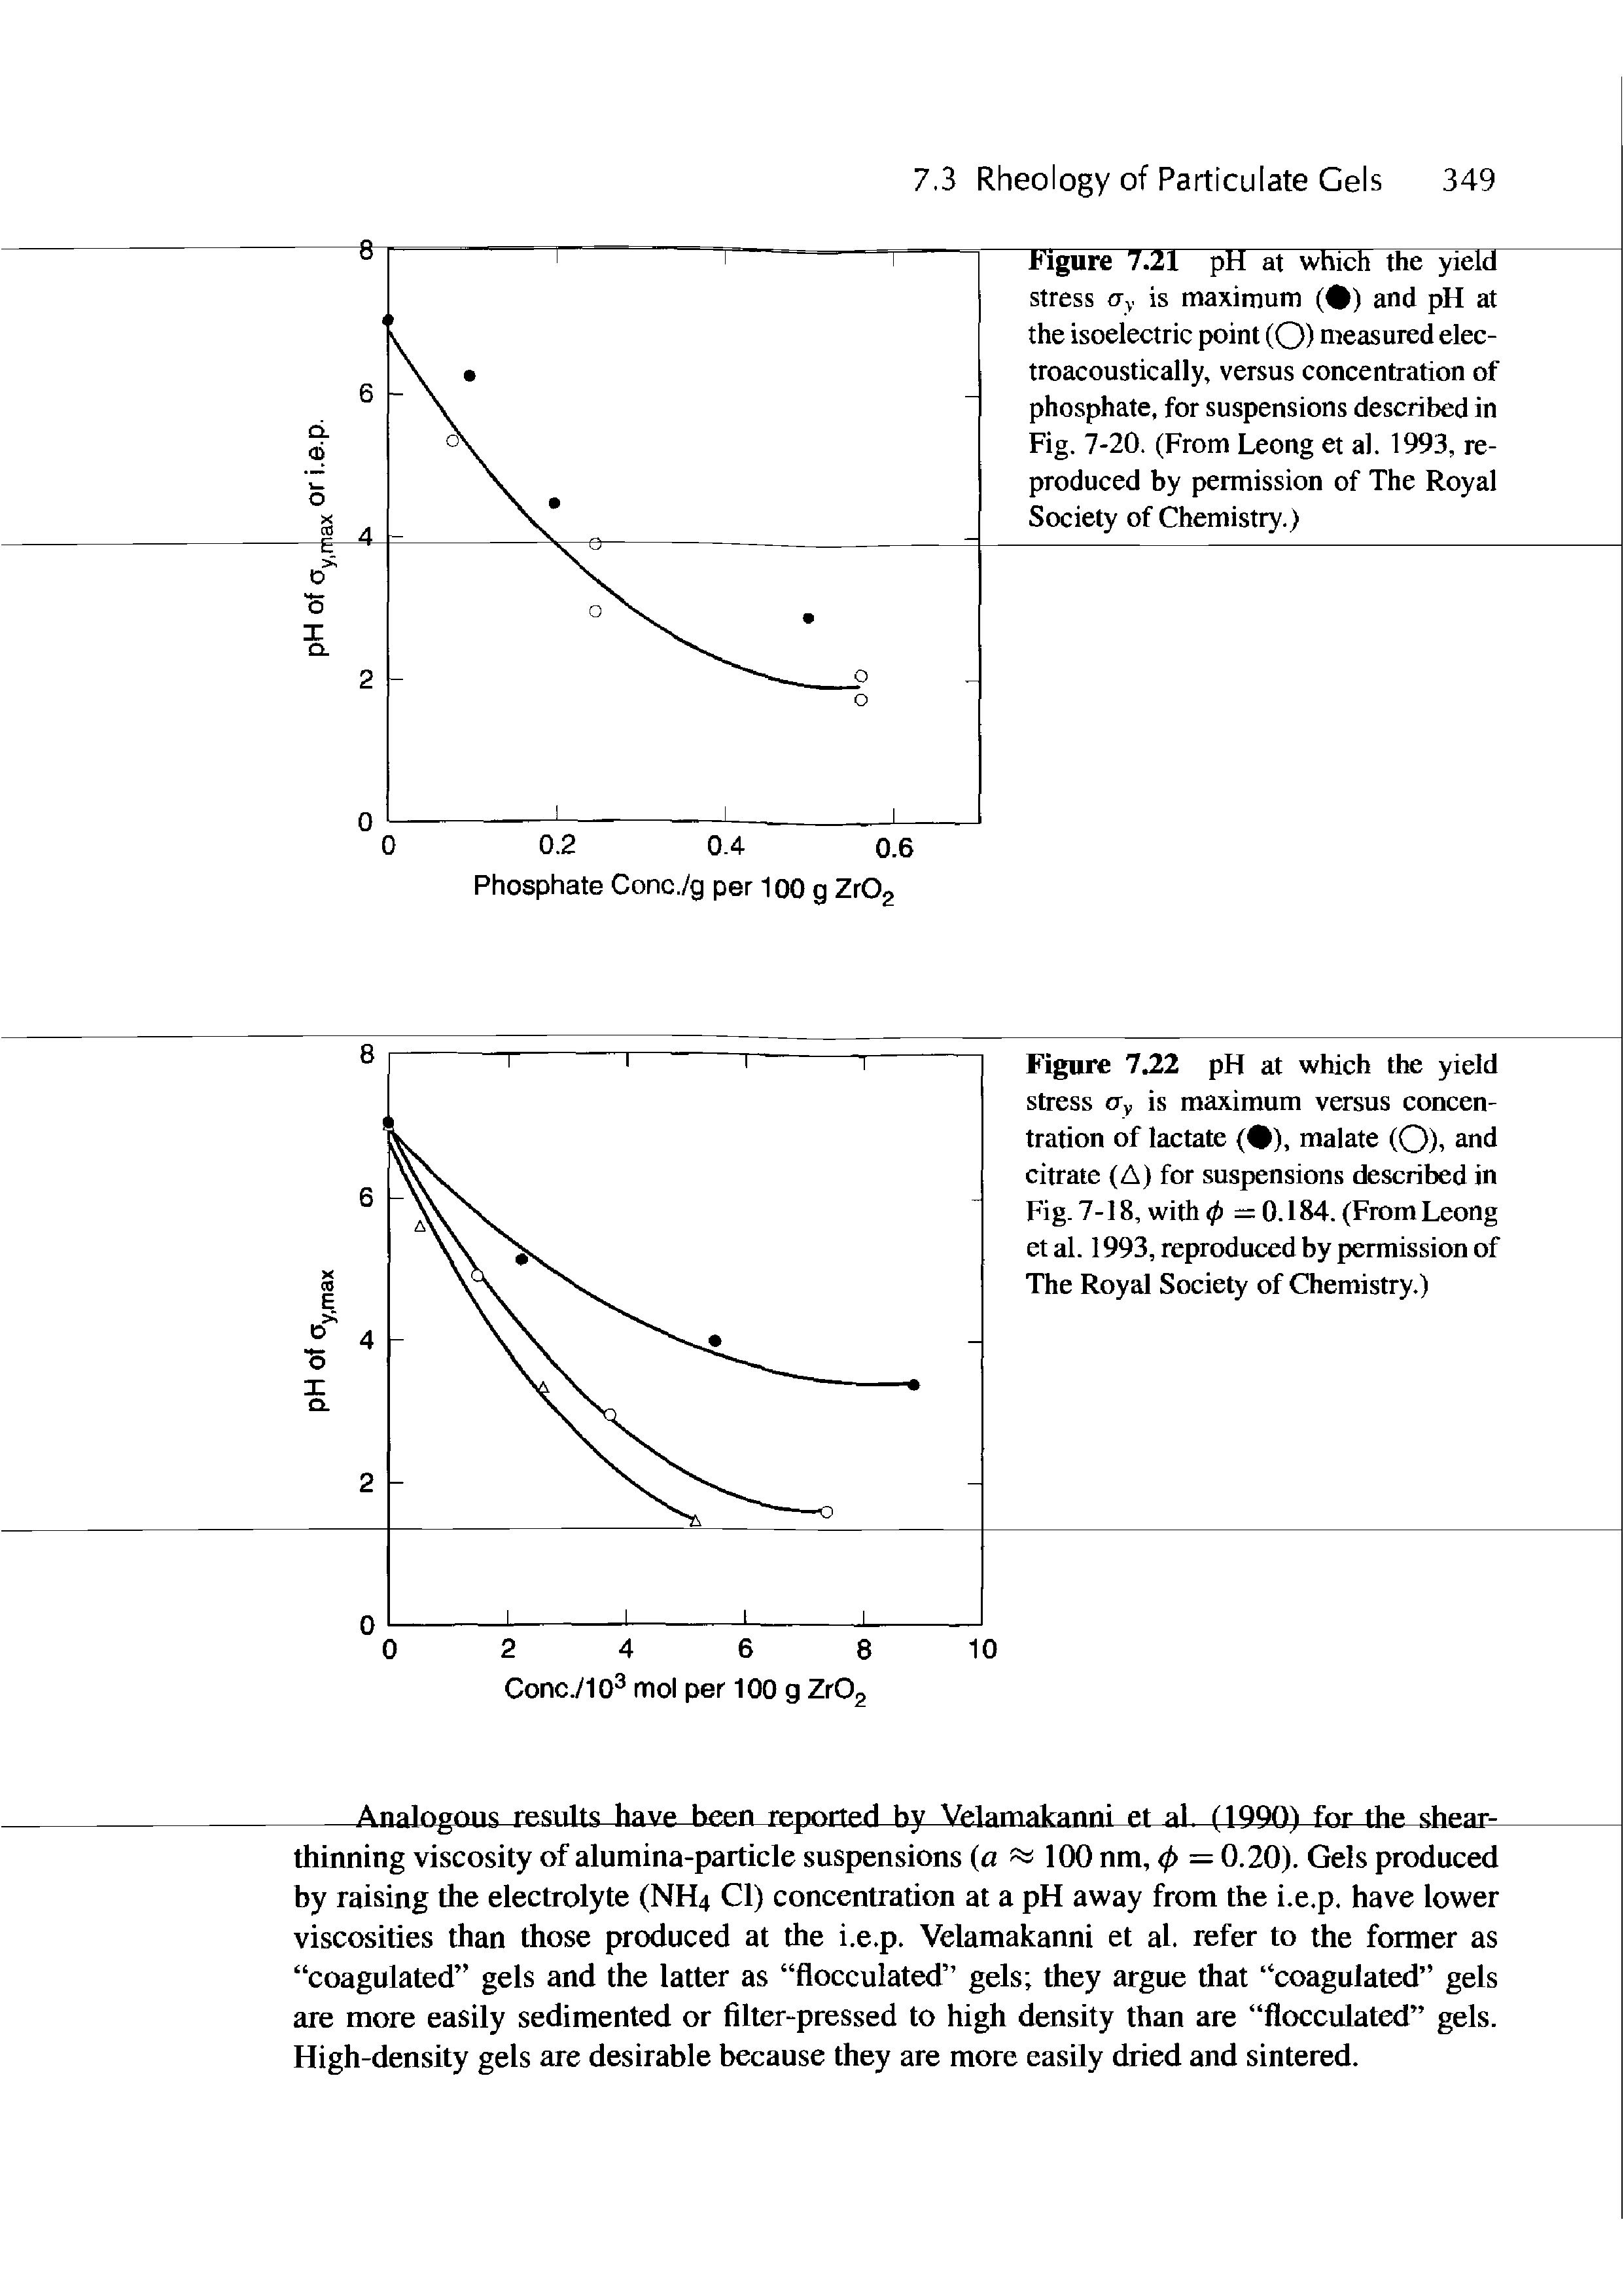 Figure 7.21 pH at which the yield stress Uy is maximum ( ) and pH at the isoelectric point (O) measured electroacoustically, versus concentration of phosphate, for suspensions described in Fig. 7-20. (From Leong et al. 1993, reproduced by permission of The Royal Society of Chemistry.)...